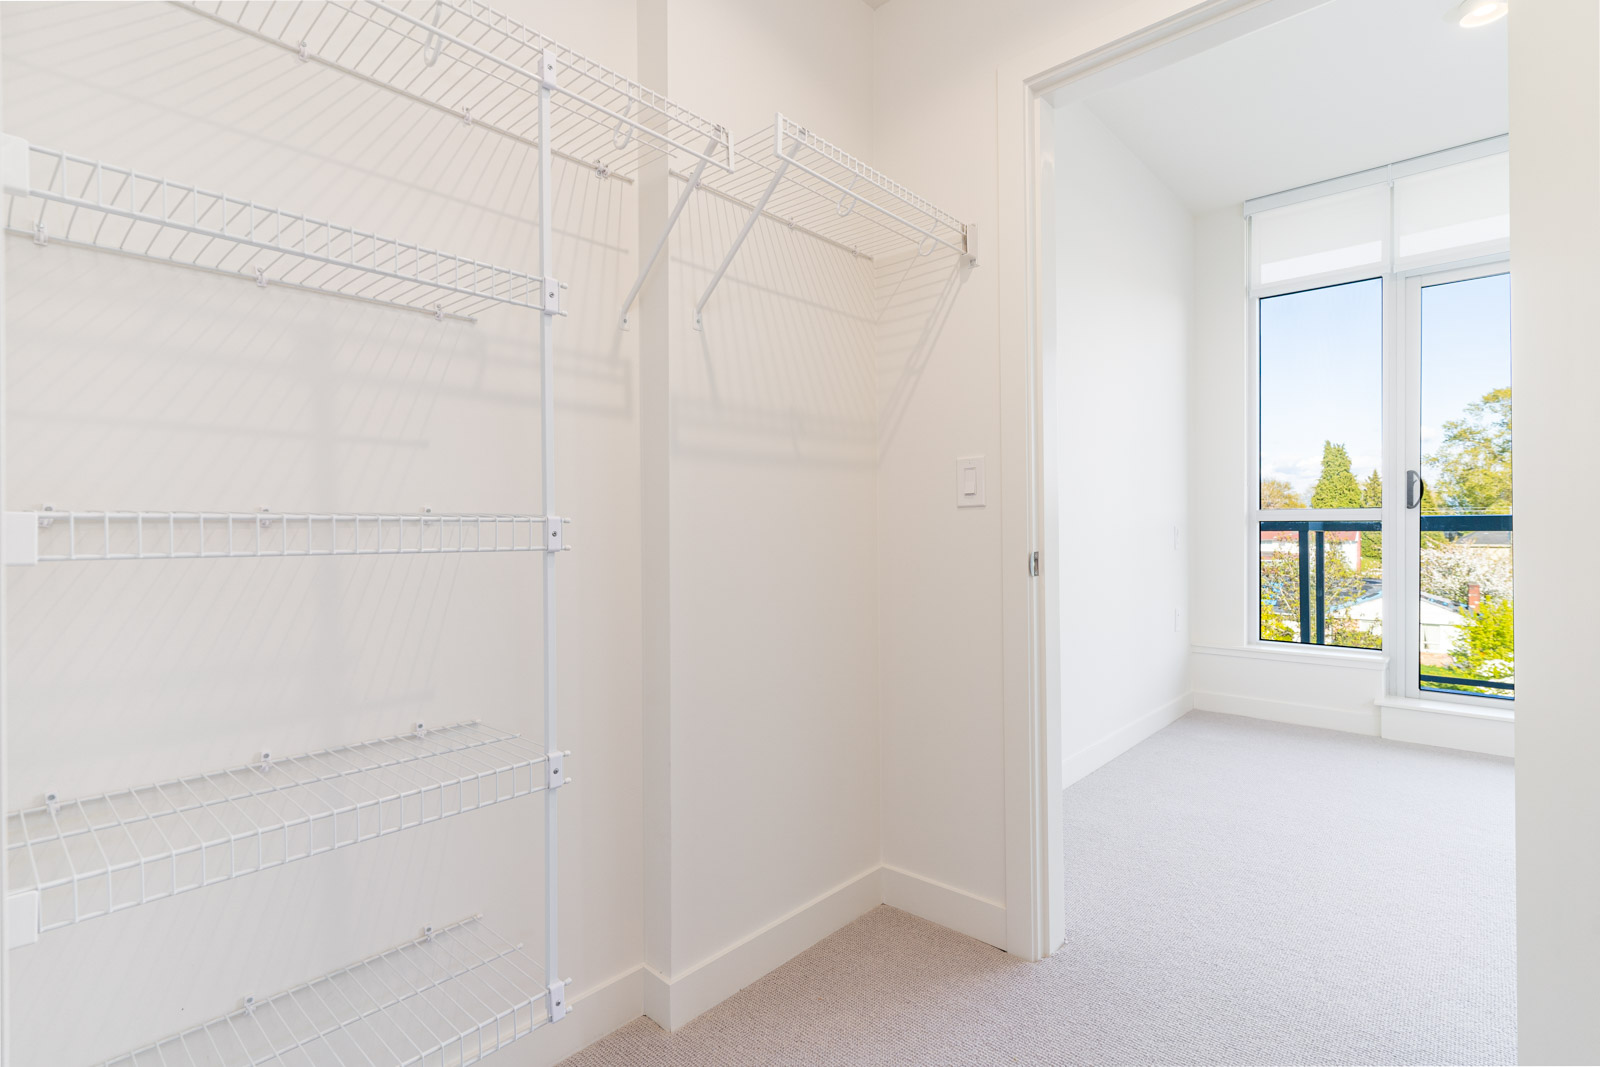 Spacious walk in closet in luxury condo managed by Birds Nest Properties